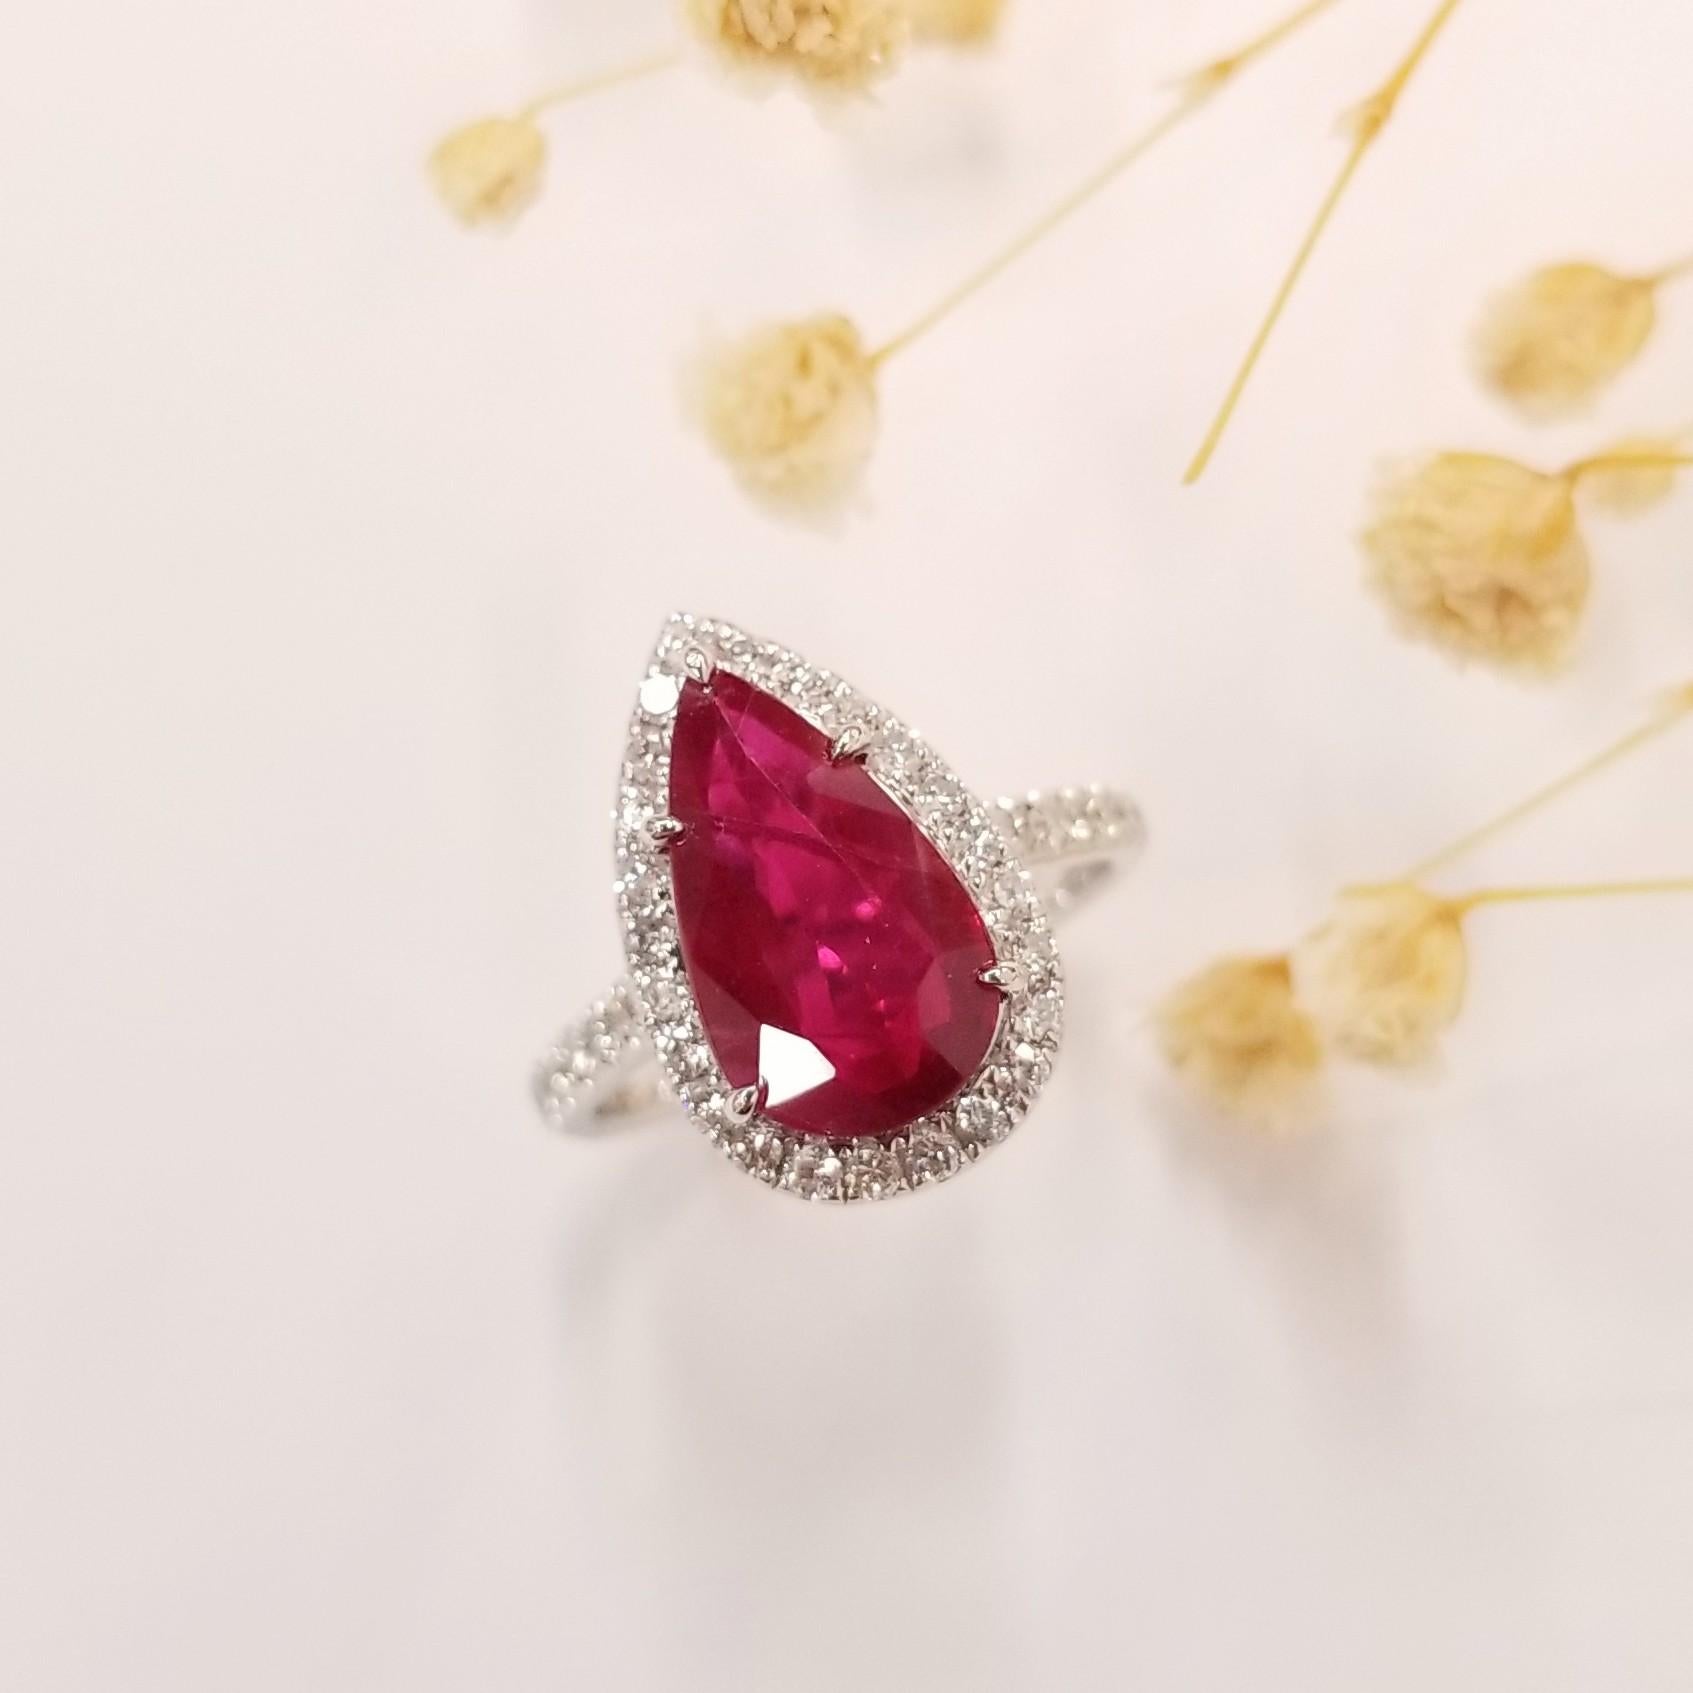 ntroducing a magnificent piece of jewelry, behold the AIG Certified 3.03 Carat Burmese Ruby Ring in a captivating vivid red color, featuring a cushion shape and an exquisite halo setting. Crafted in 18K white gold, this modern-style ring is adorned